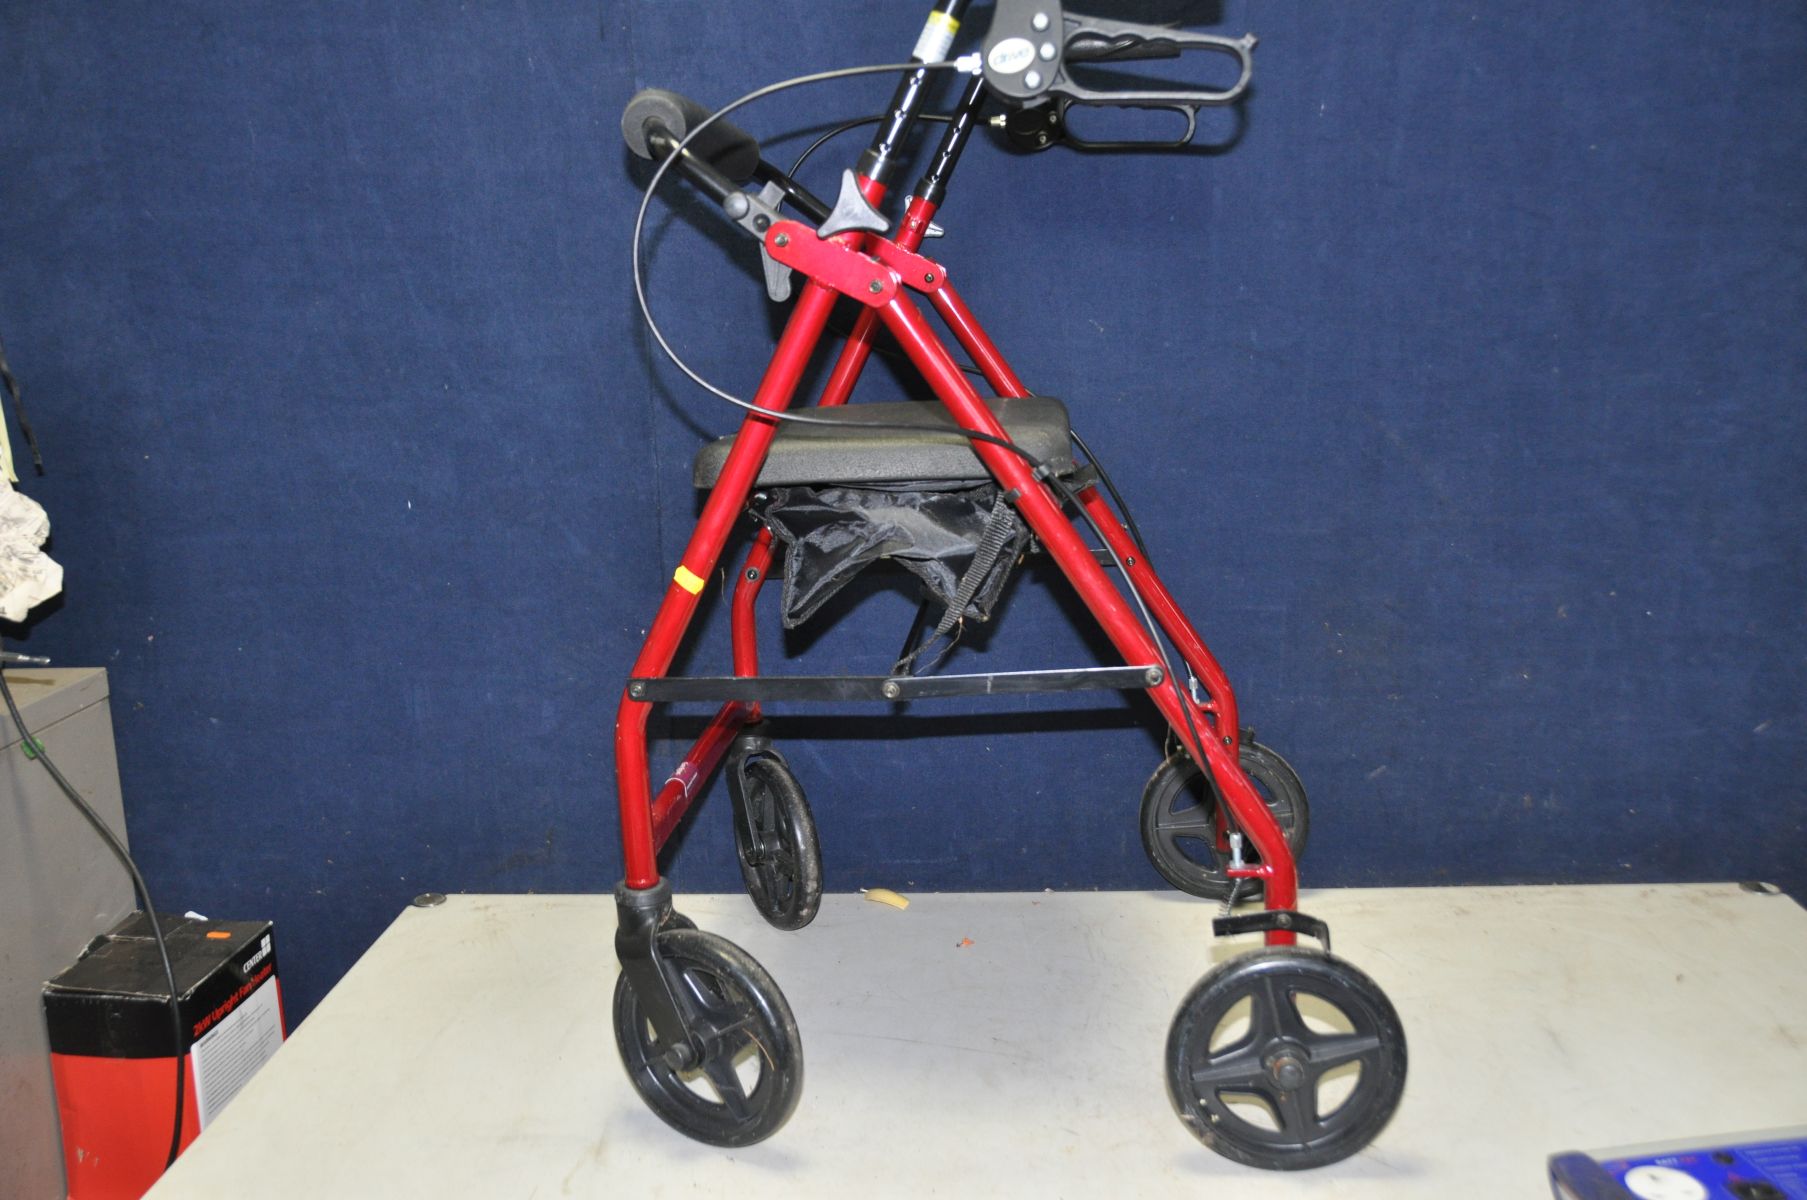 A GO GO ELITE SPORT MOBILITY SCOOTER with charger, one key, front basket and rear bag along with a - Image 3 of 3